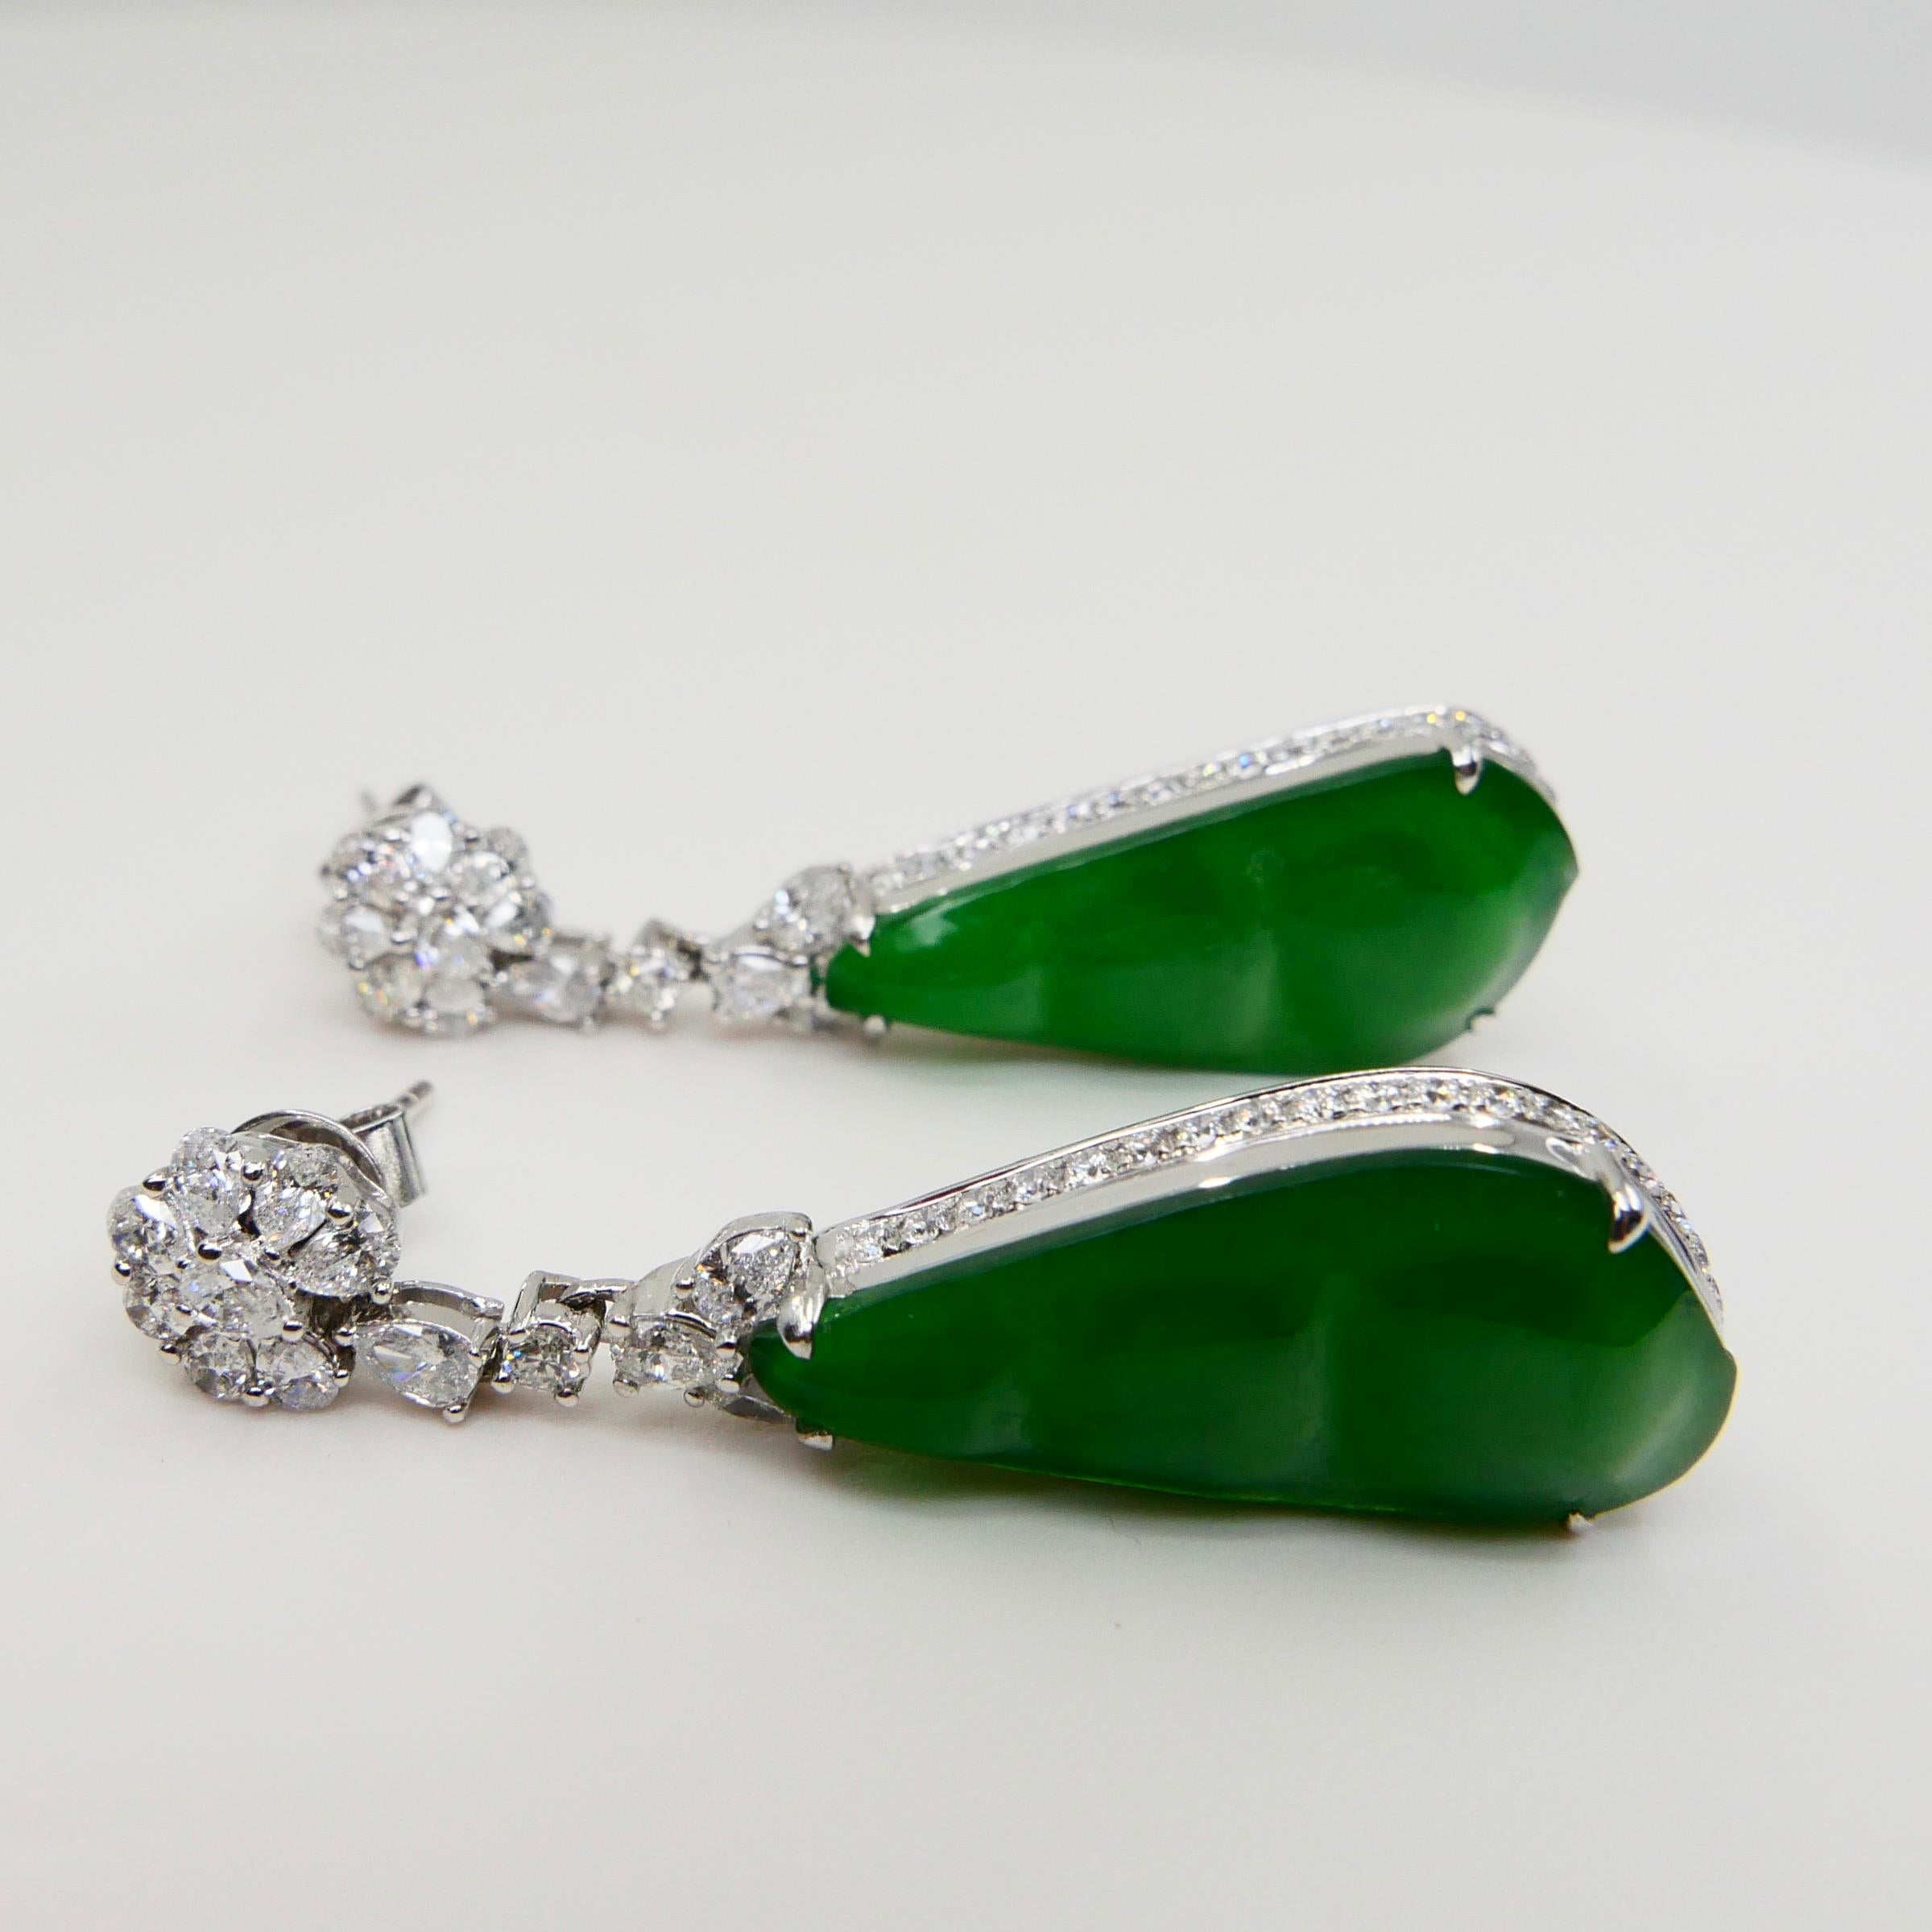 Certified Natural Type A Icy Peapod Jade Diamond Earrings, Intense Apple Green For Sale 4